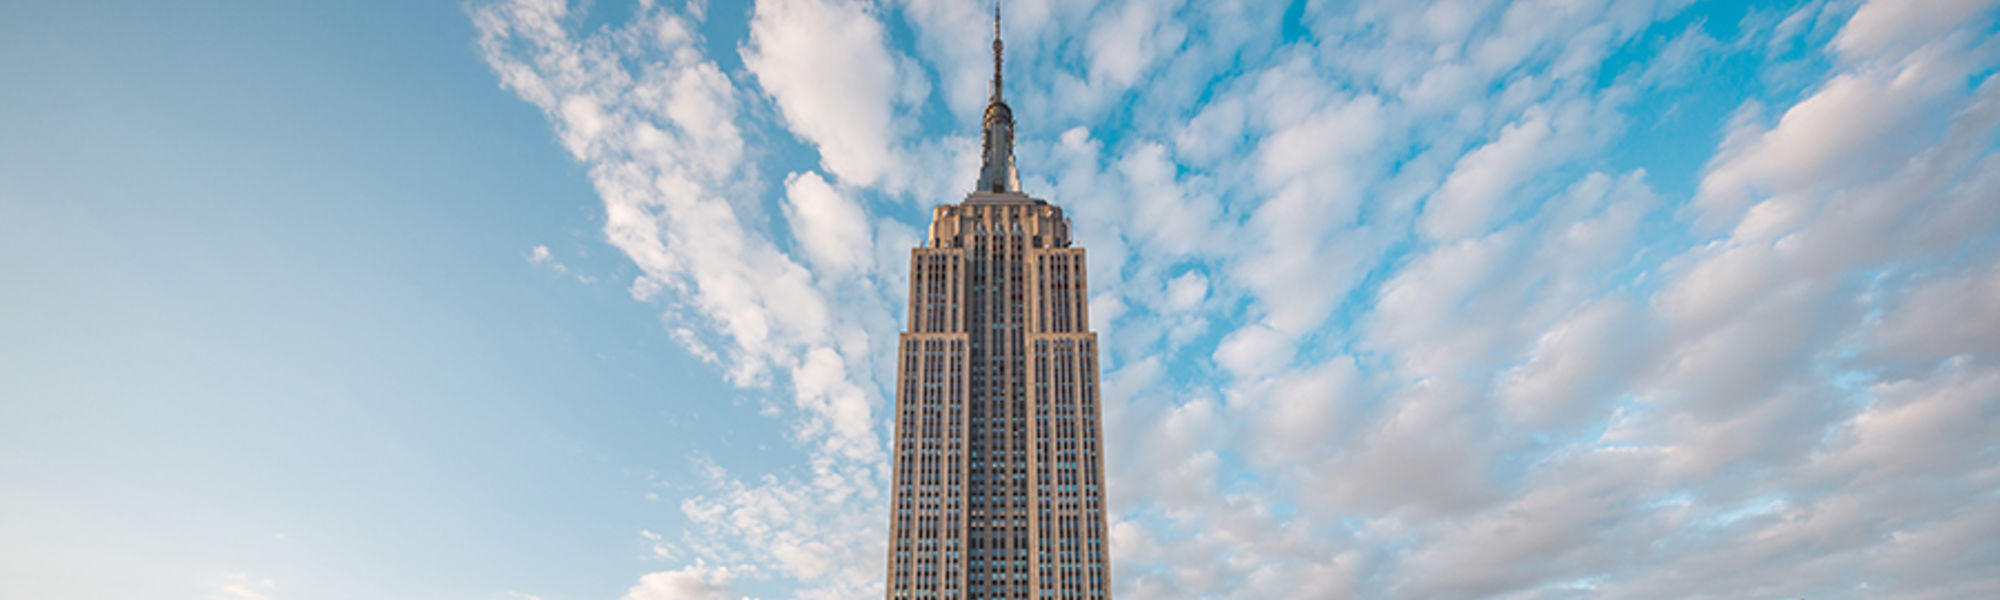 Hero image of the Empire State Building